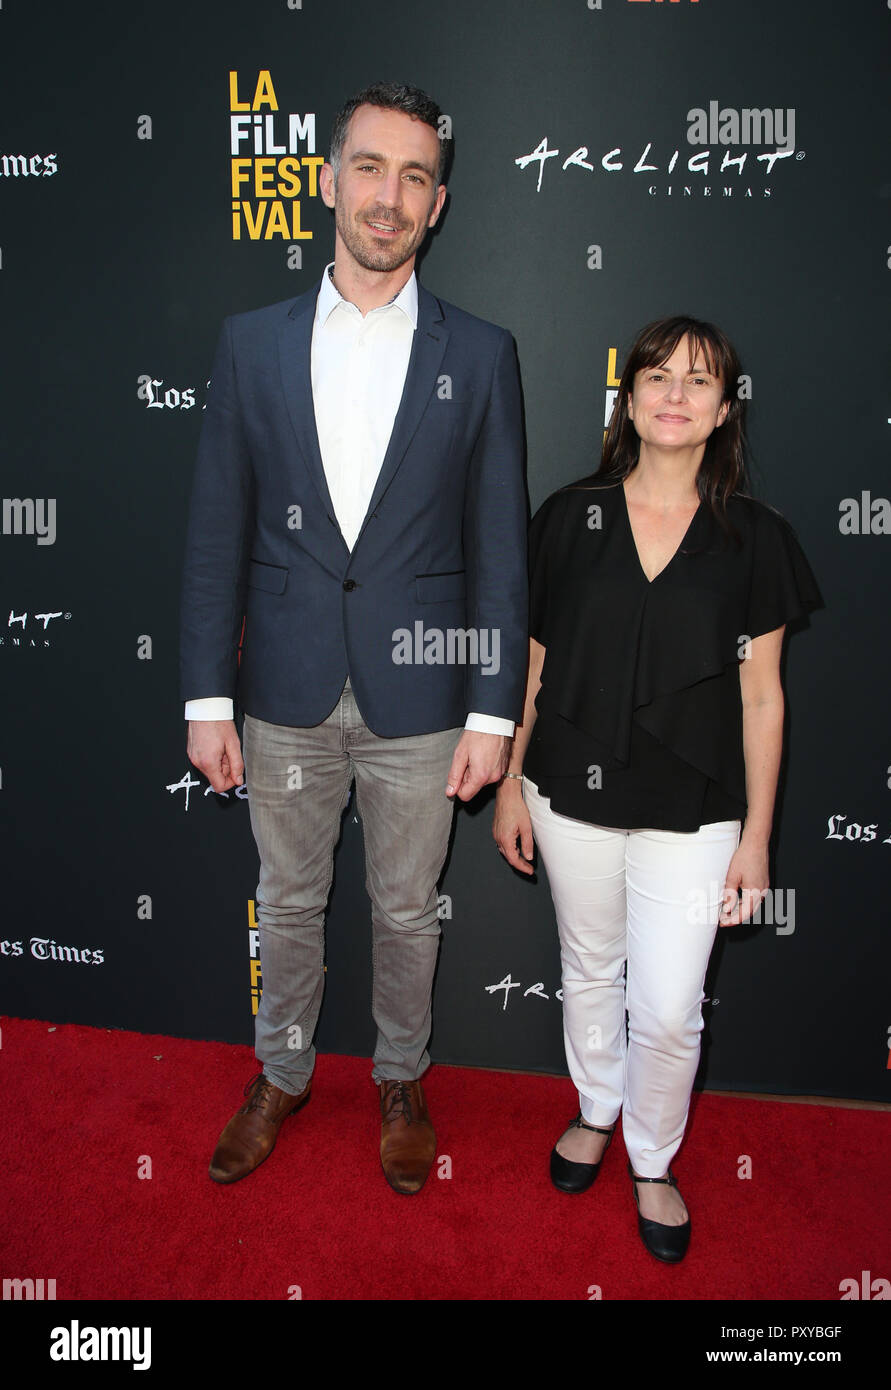 2018 LA Film Festival - 'We Have Always Lived in the Castle' - Screening  Featuring: Nada Cirjanic, Matt Stevens Where: Culver City, California, United States When: 22 Sep 2018 Credit: FayesVision/WENN.com Stock Photo